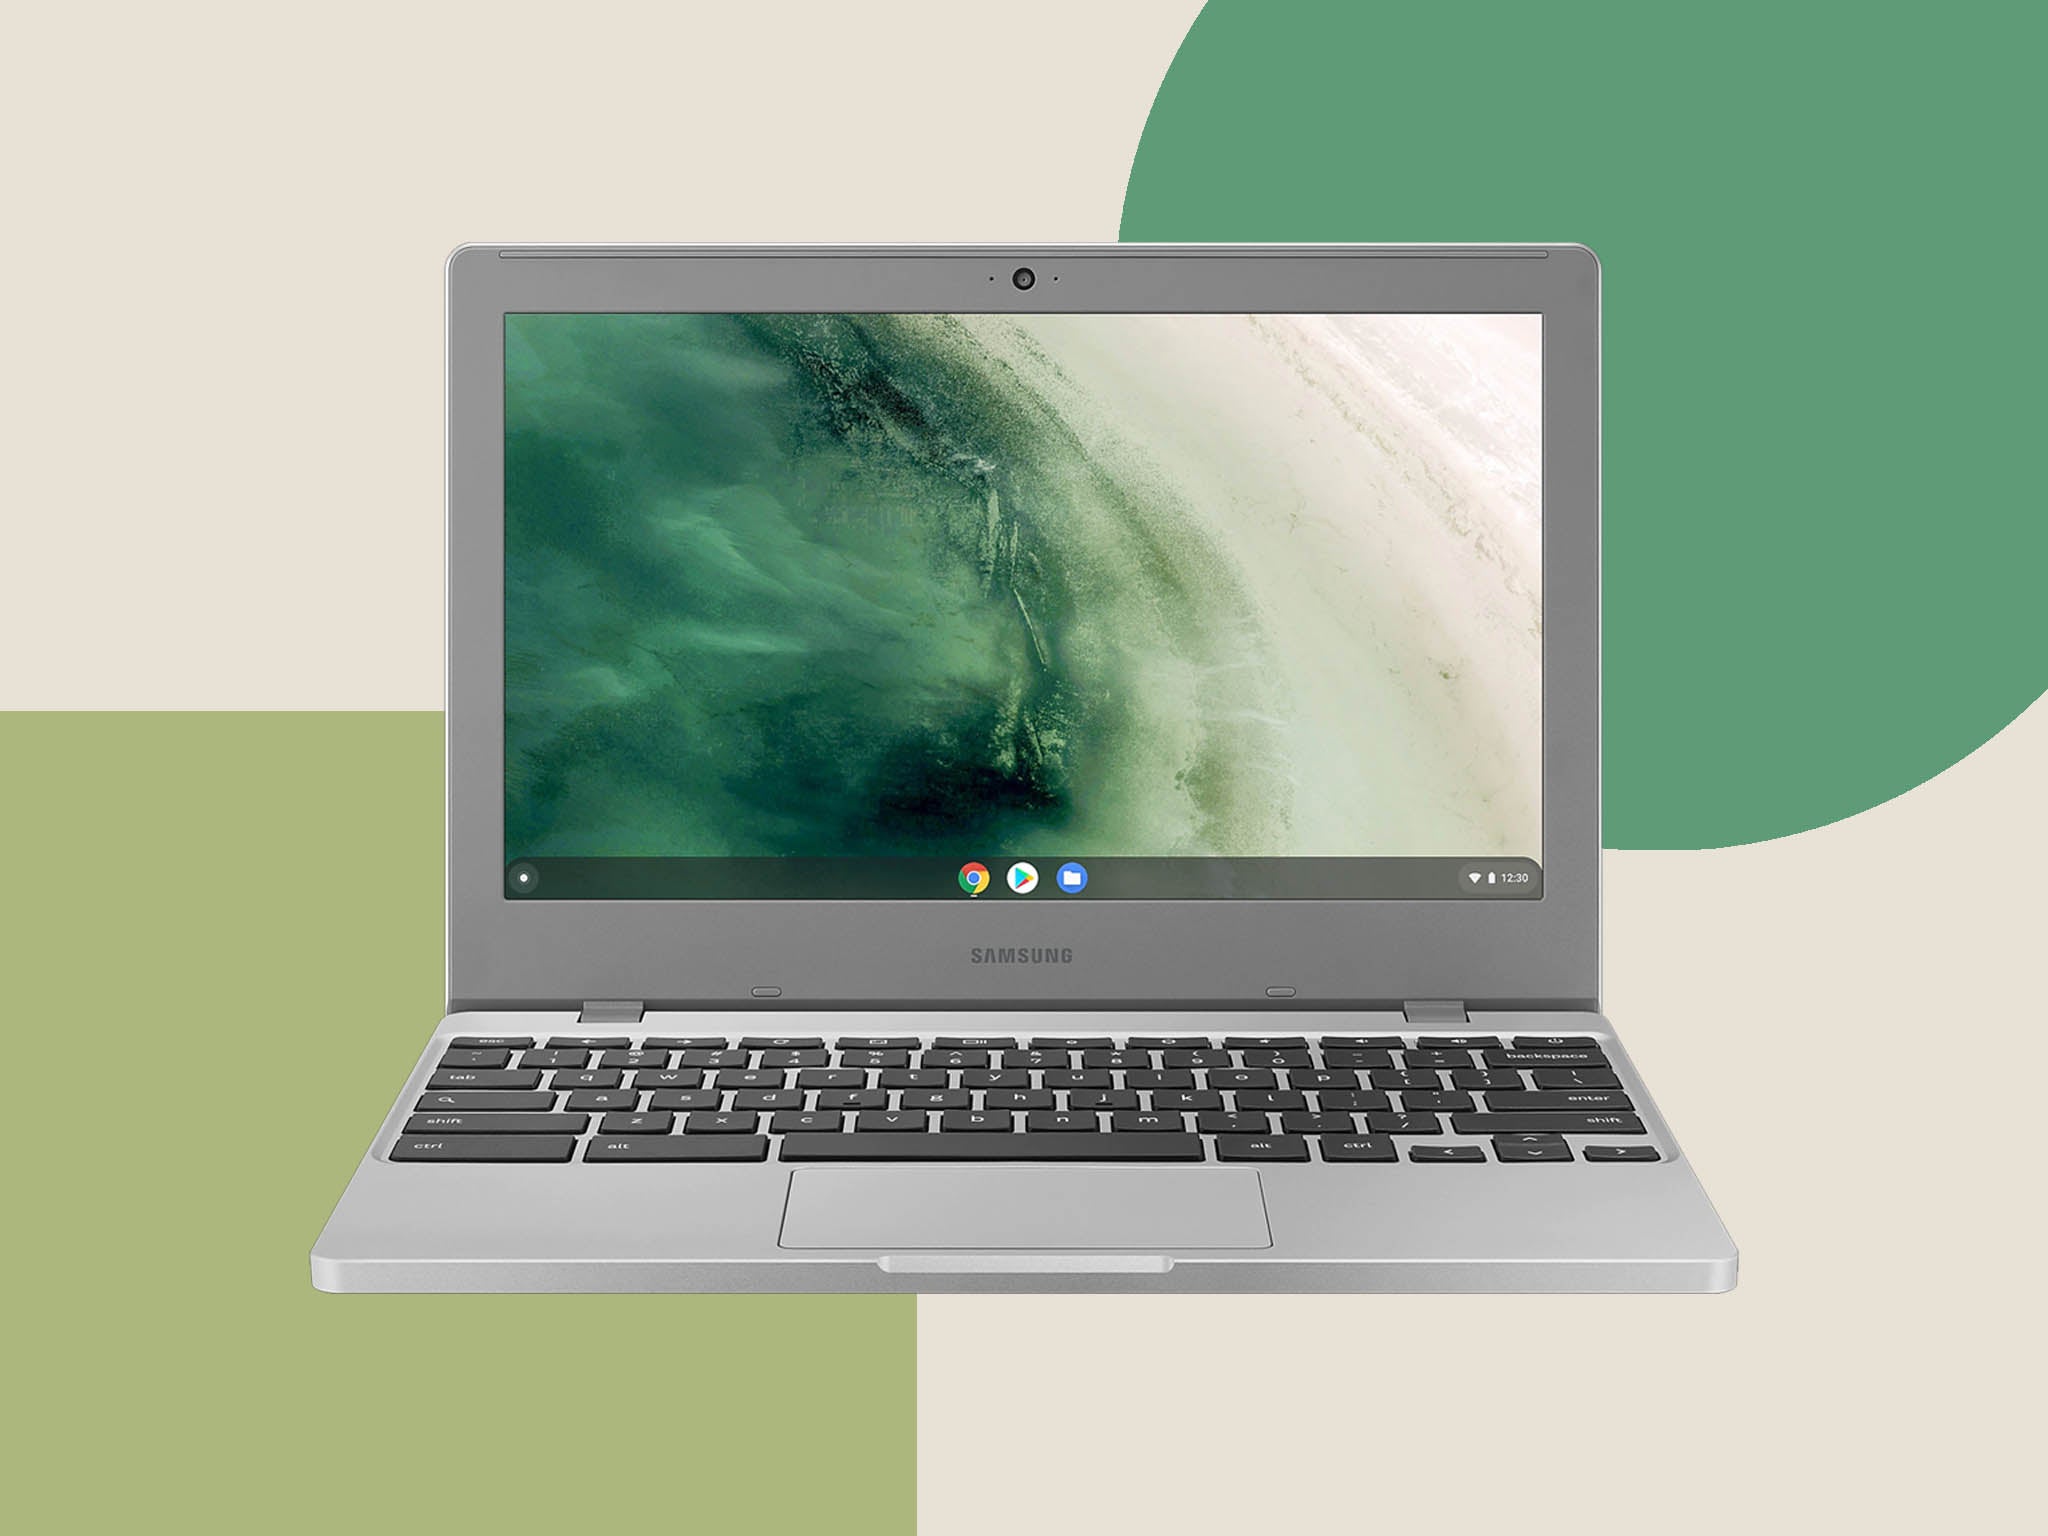 The laptop has high compatibility, making it easy to connect to a wide variety of devices